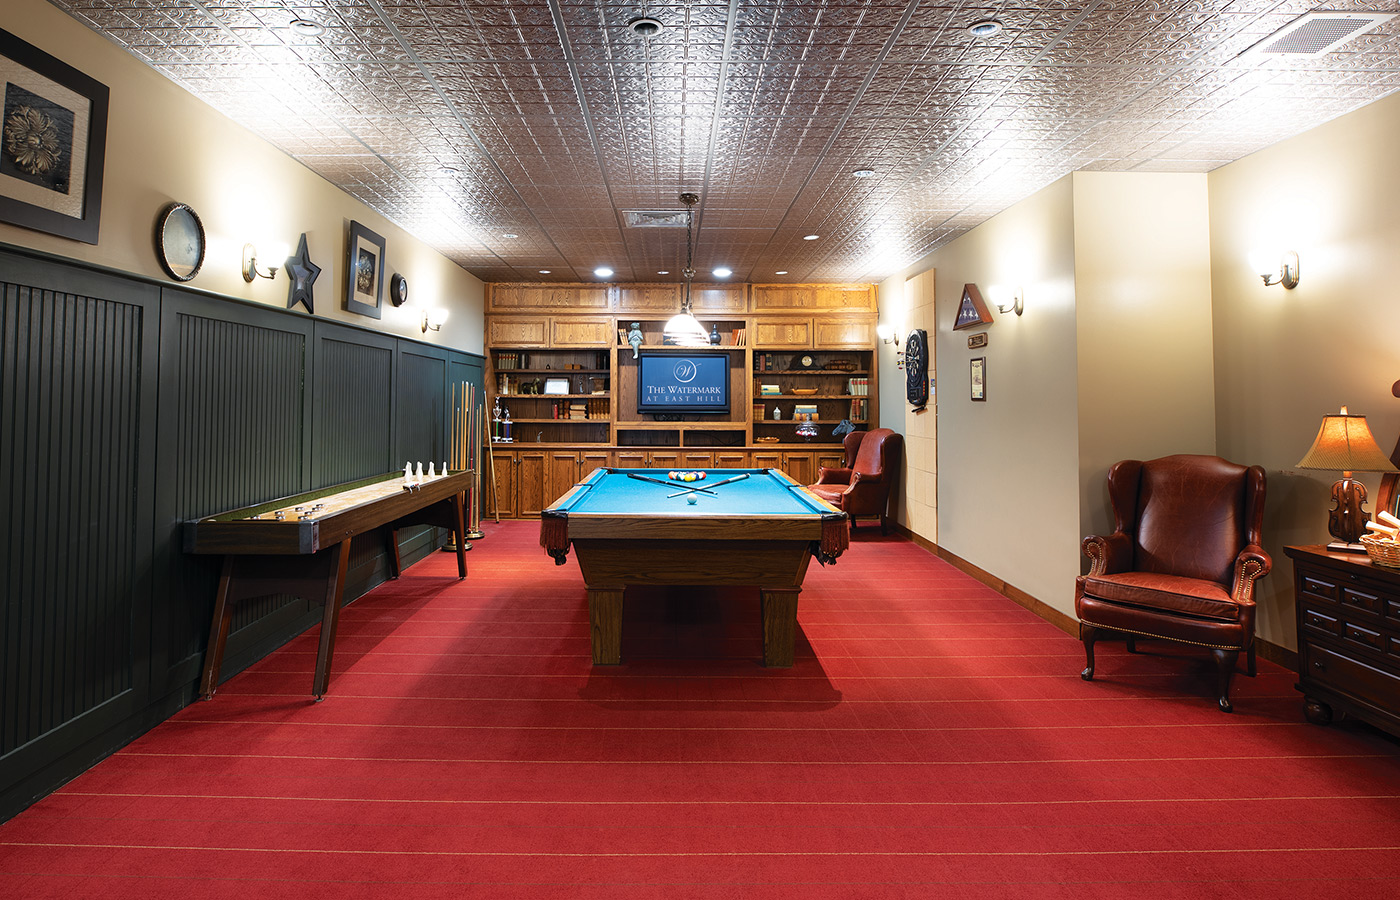 A billiards room at The Watermark at East Hill.